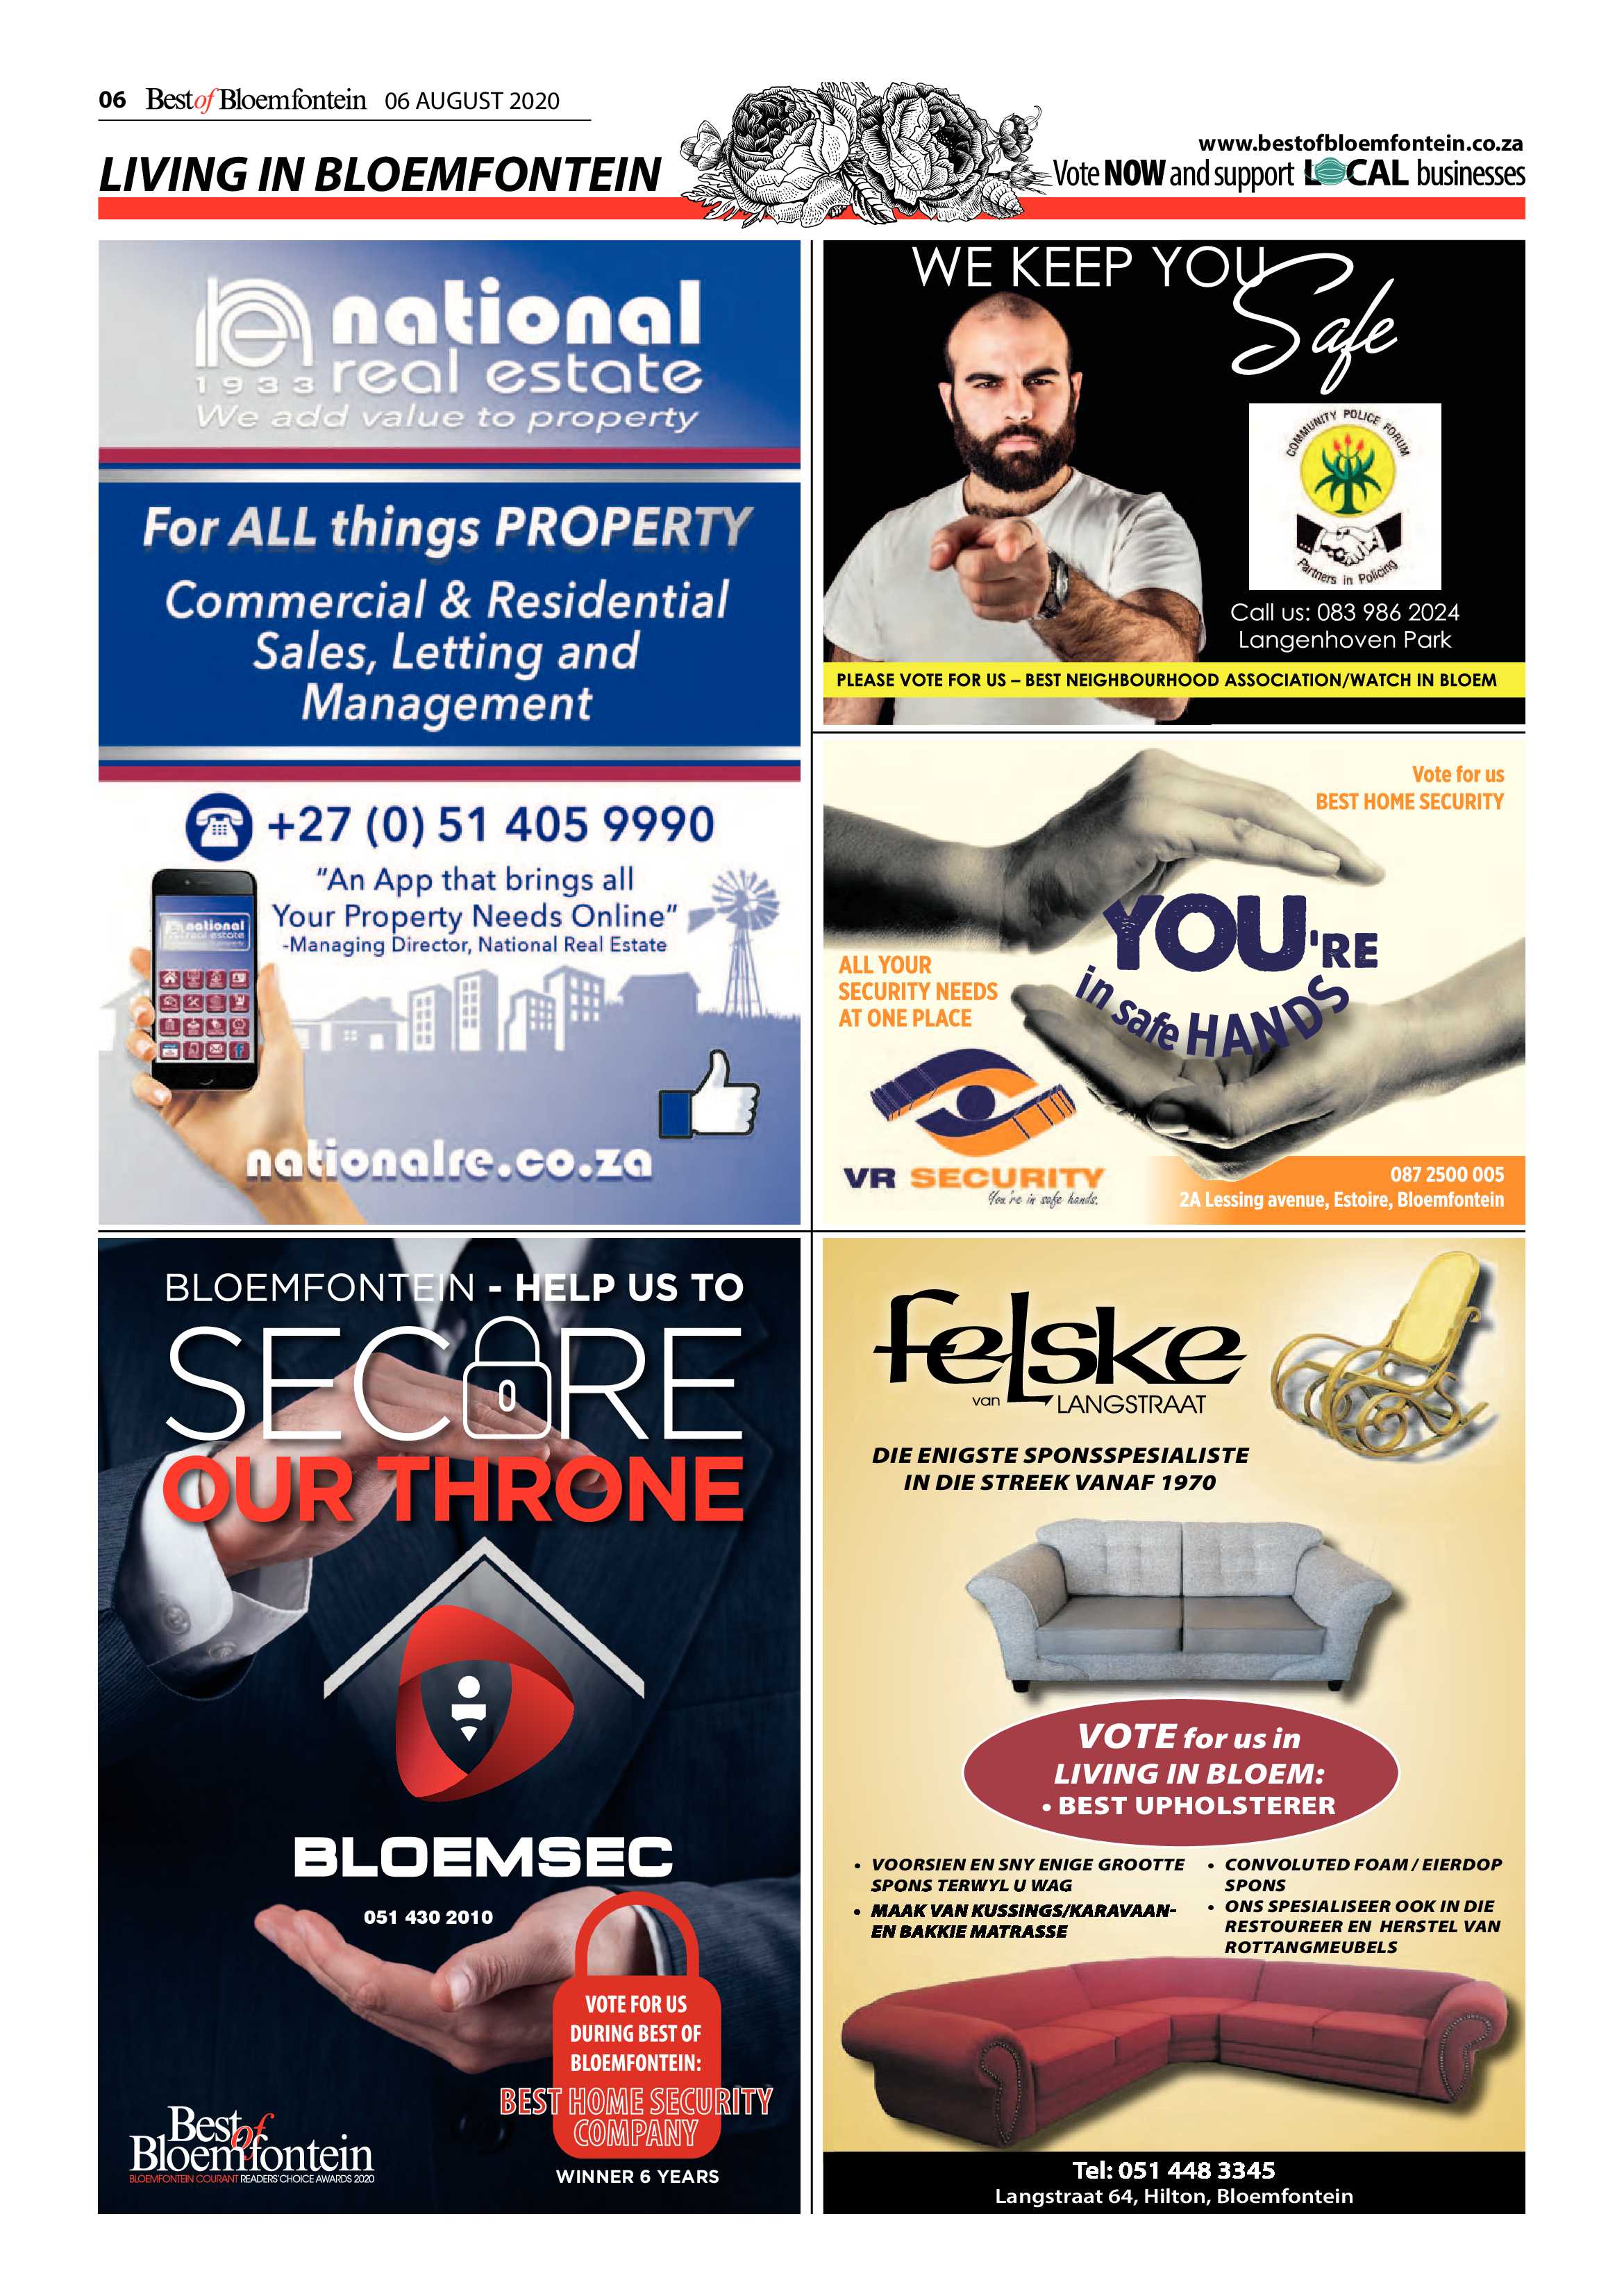 courant-best-of-bloemfontein-special-edition-6-august-2020-epapers-page-6